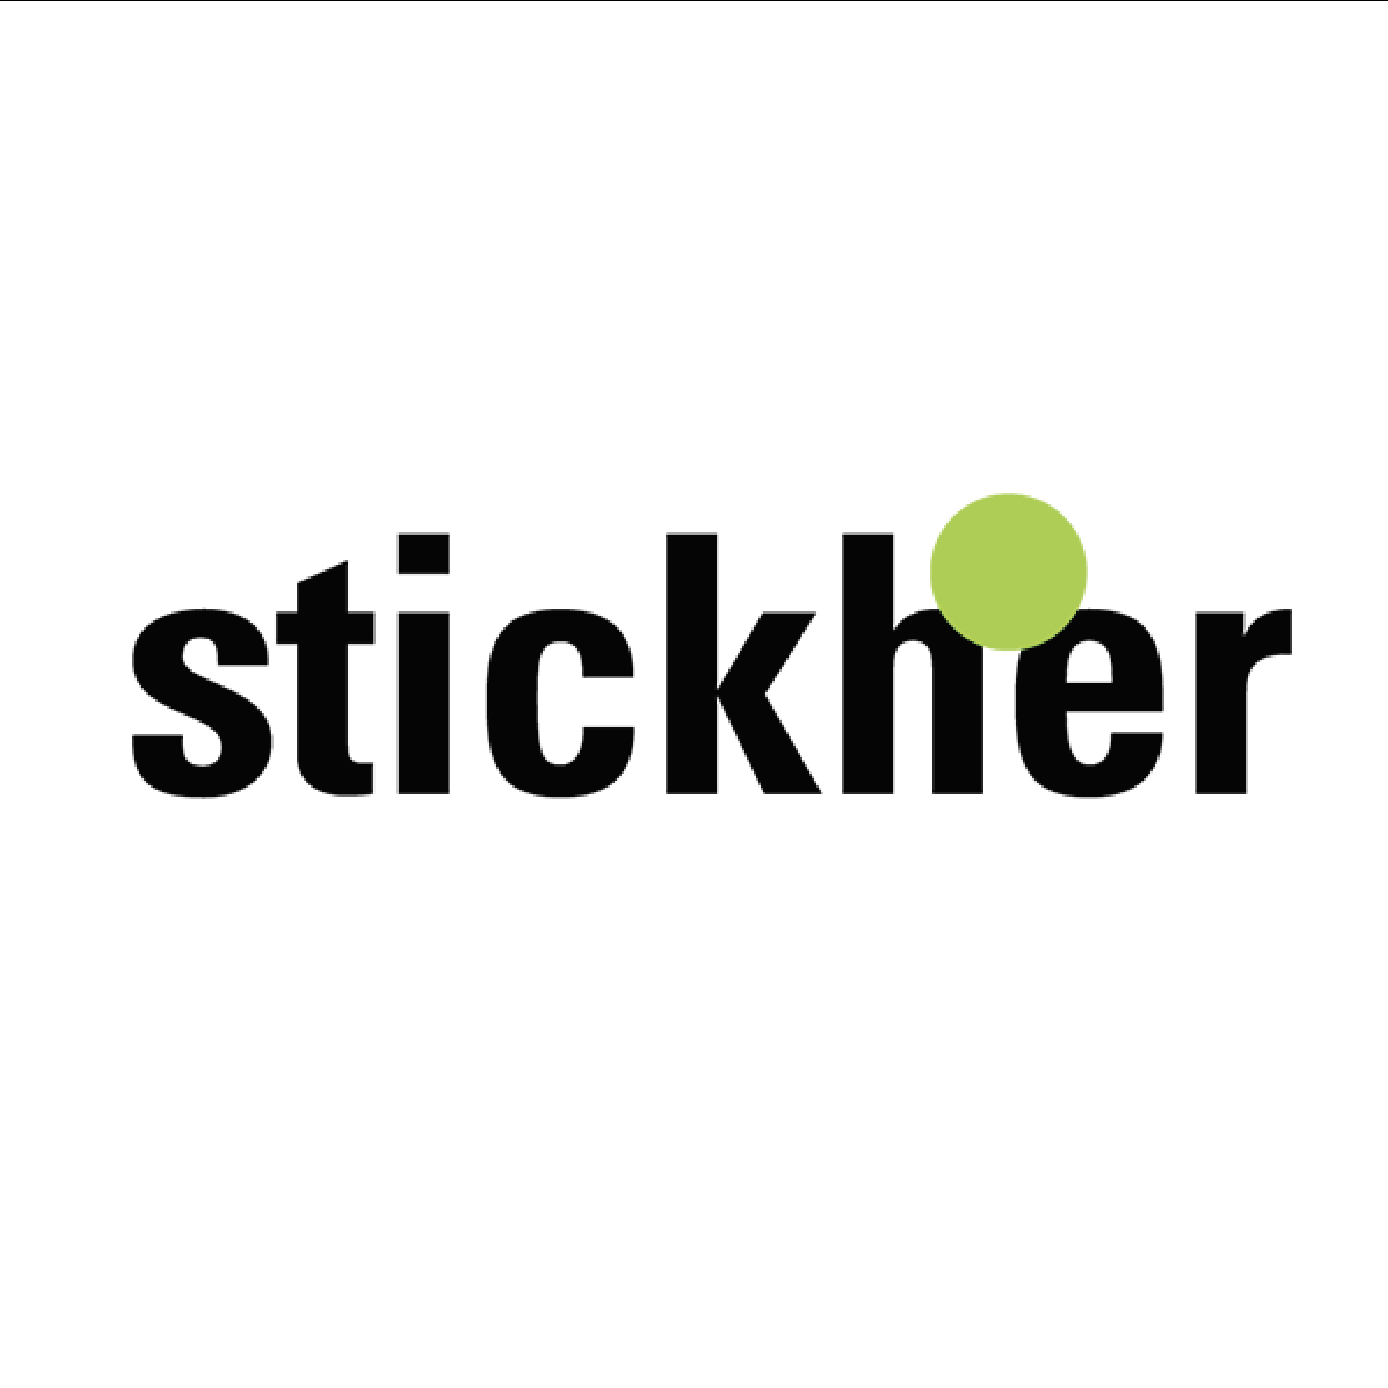 stickher<br>Stickher is a design archive and a consumer culture curation platform in South Korea. Their main target audience is moms who are interested in consuming design.